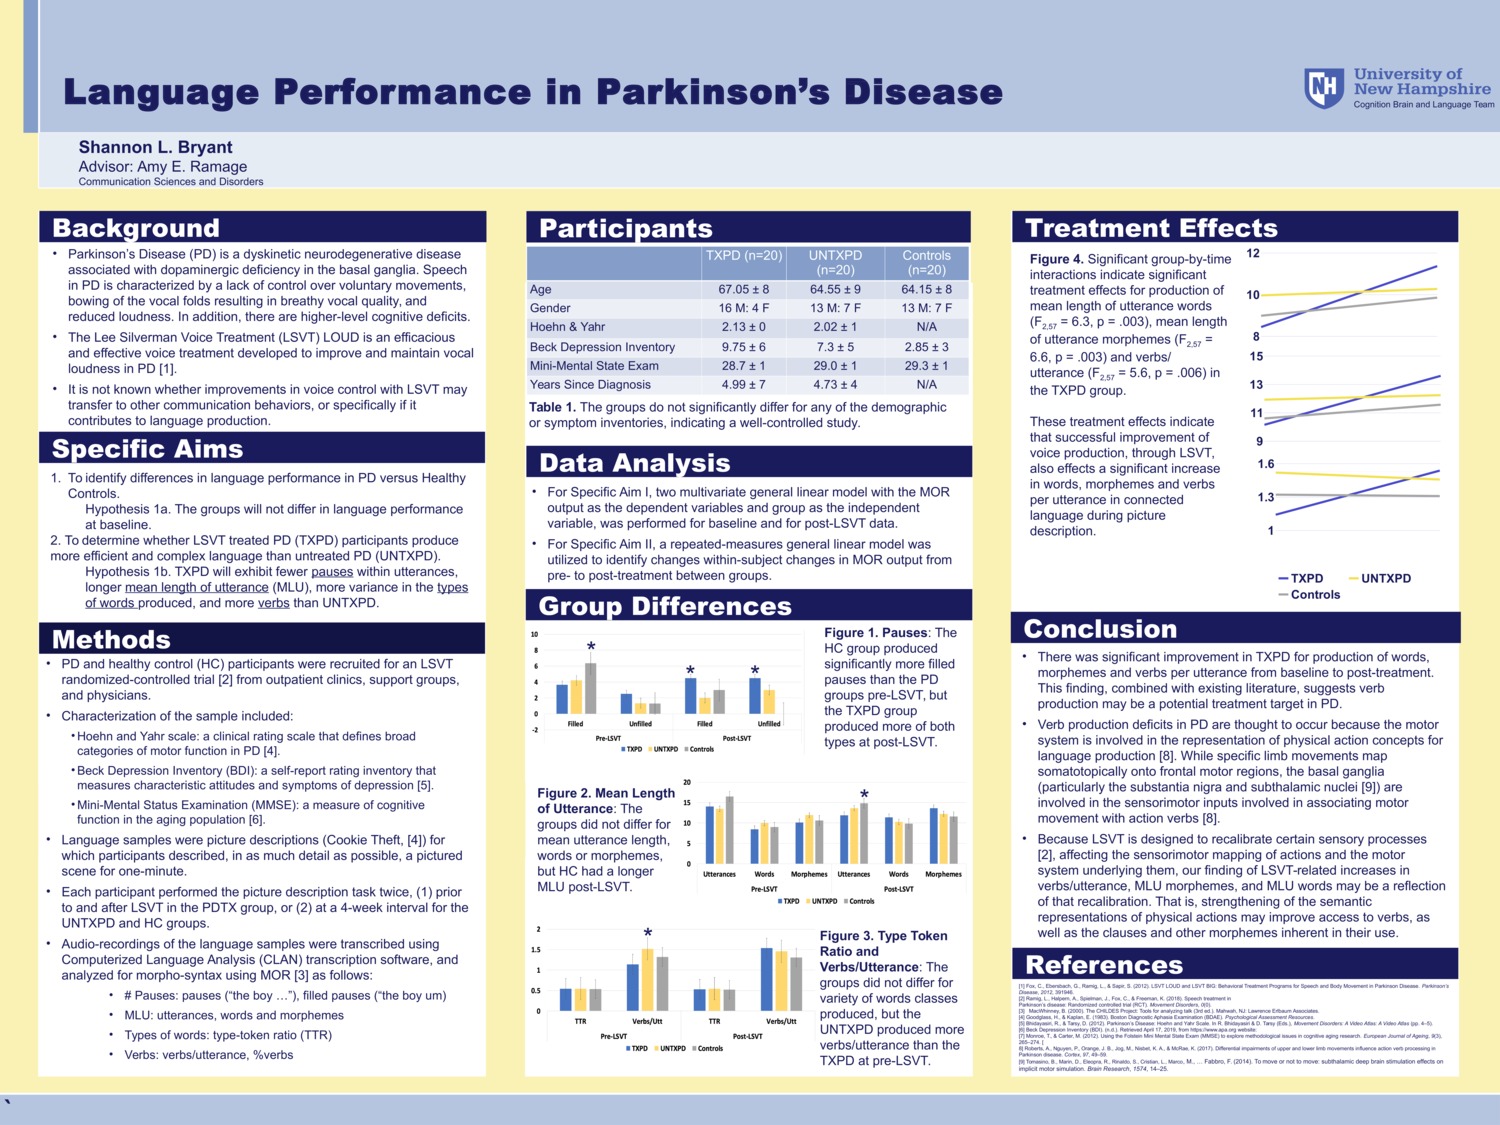 Language Performance In Parkinson's Disease by slb1016